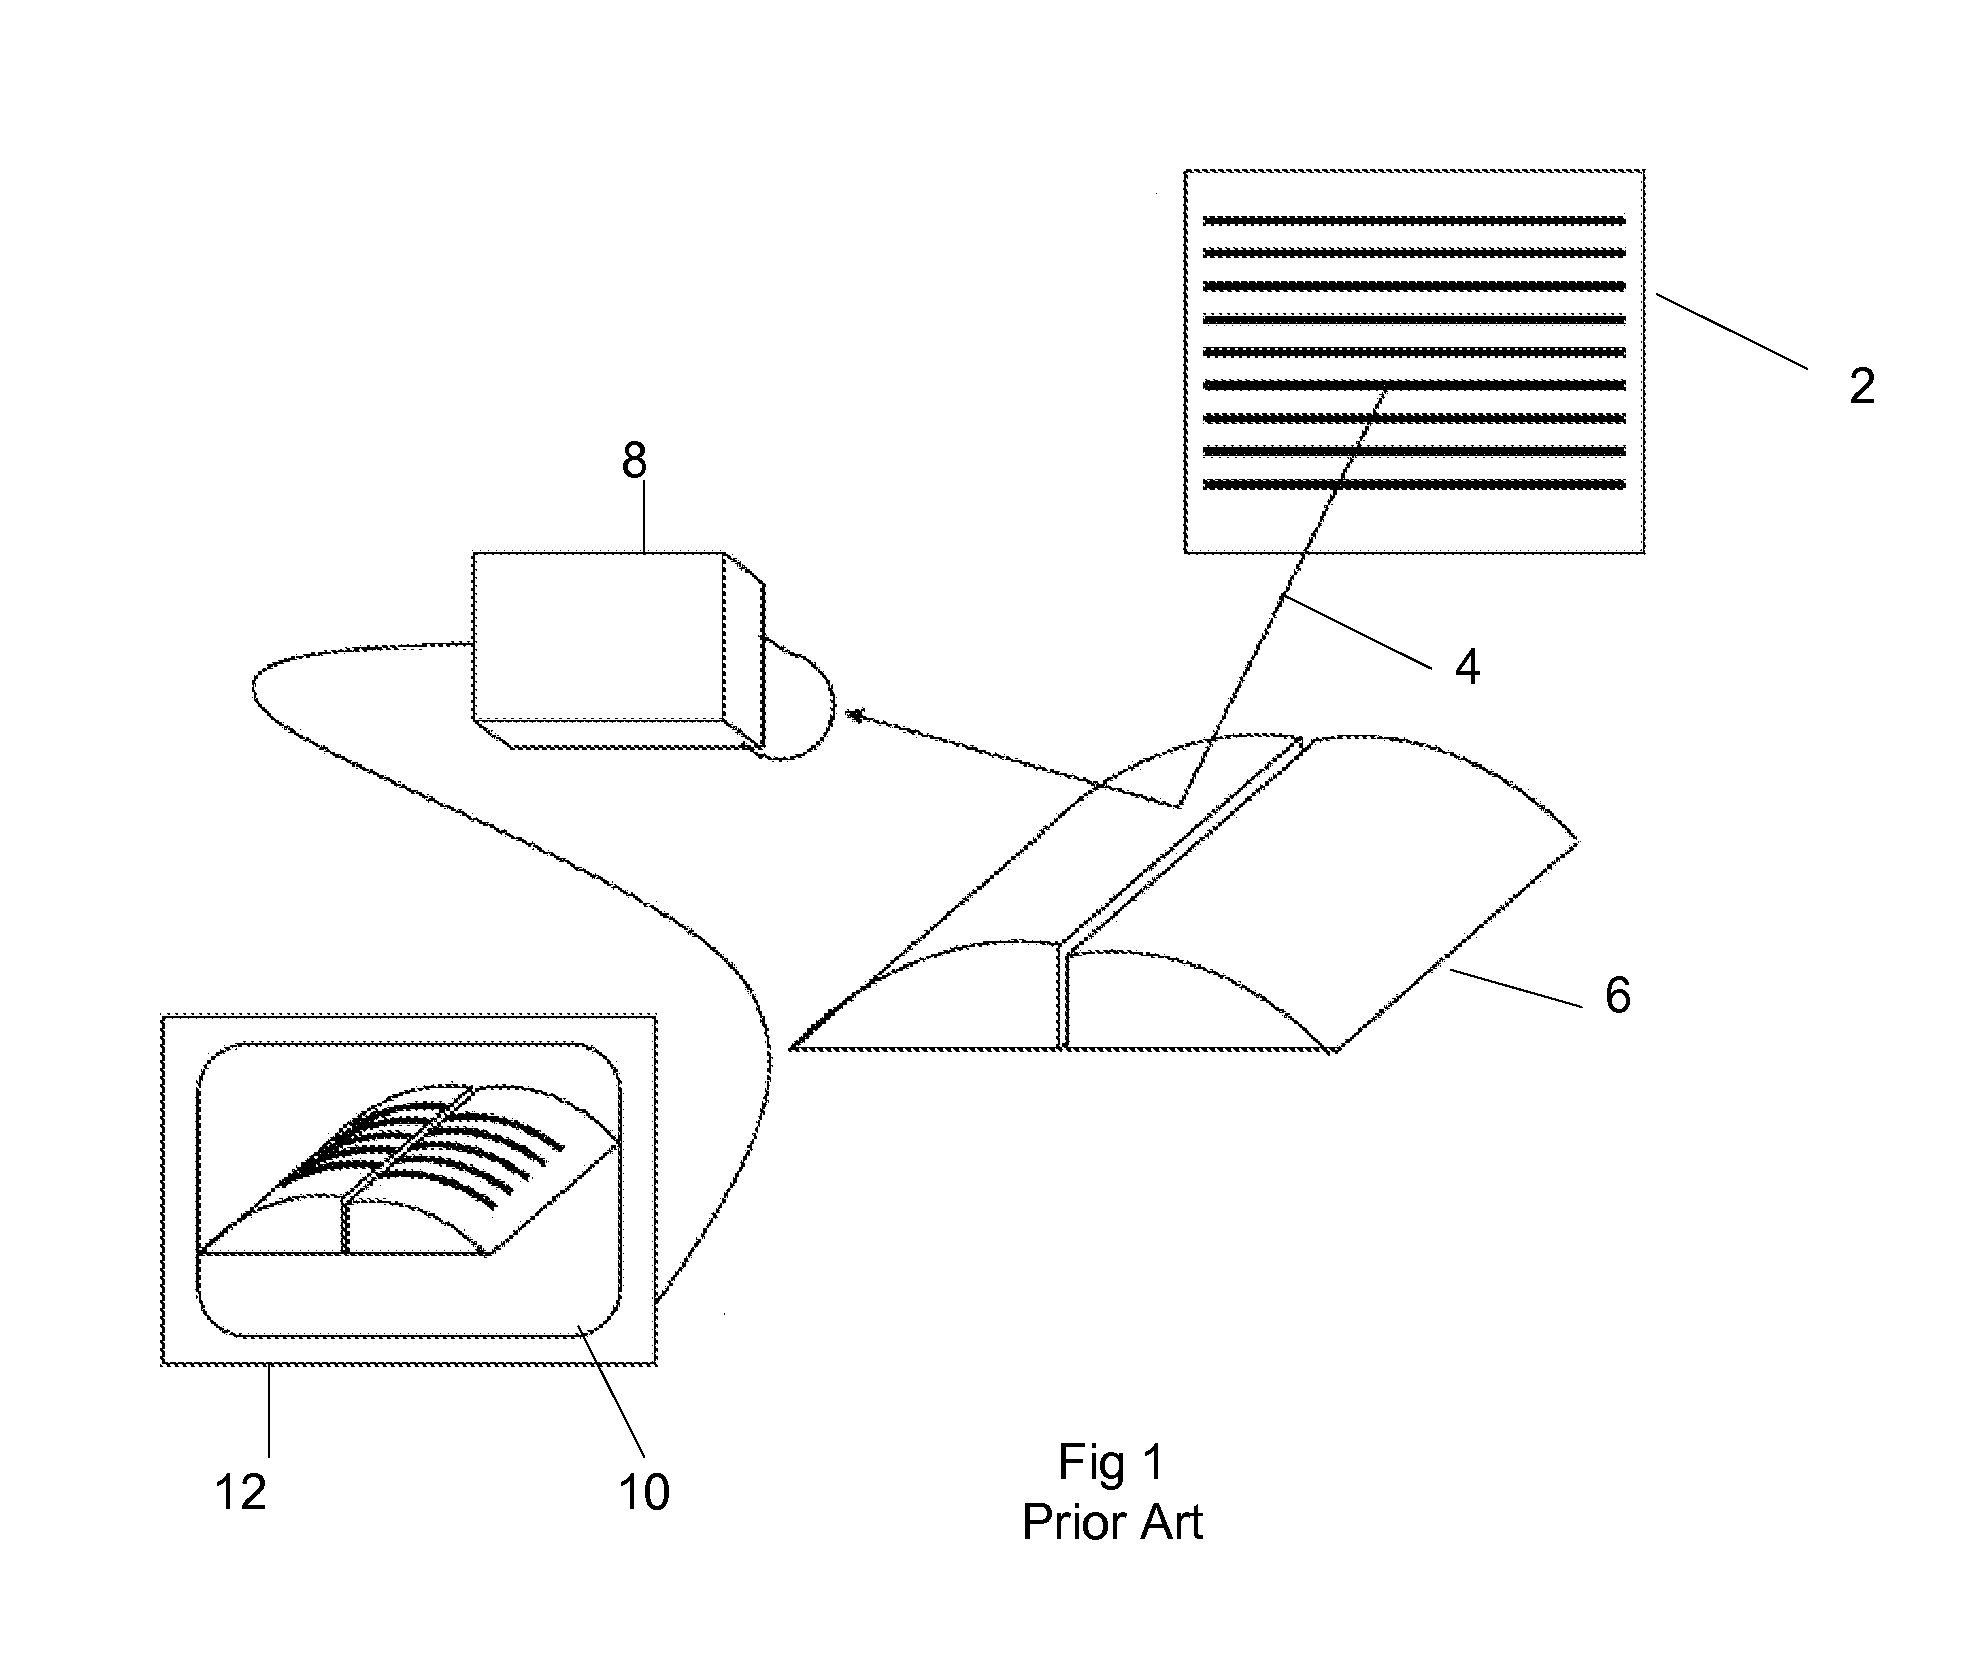 Method and apparatus for detecting defects using structured light